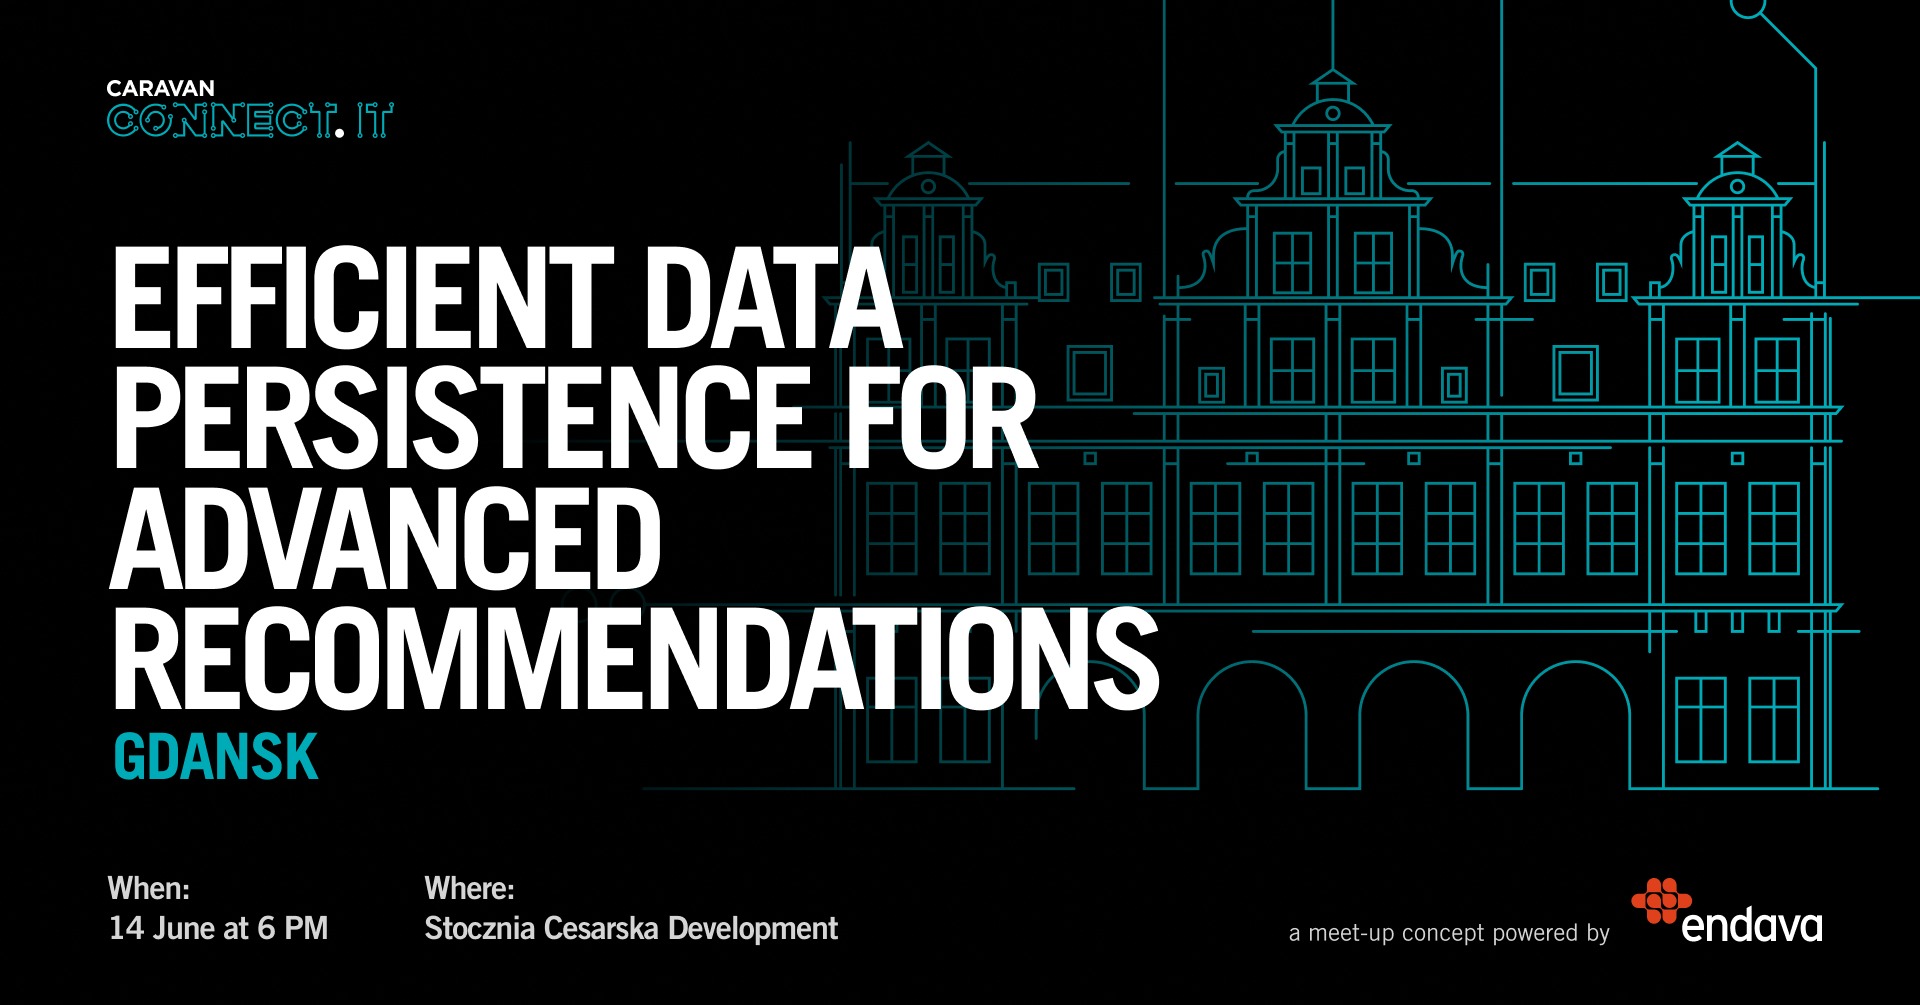 connectit-gdansk-efficient-data-persistence-for-advanced-recommendations-czerwiec-2022